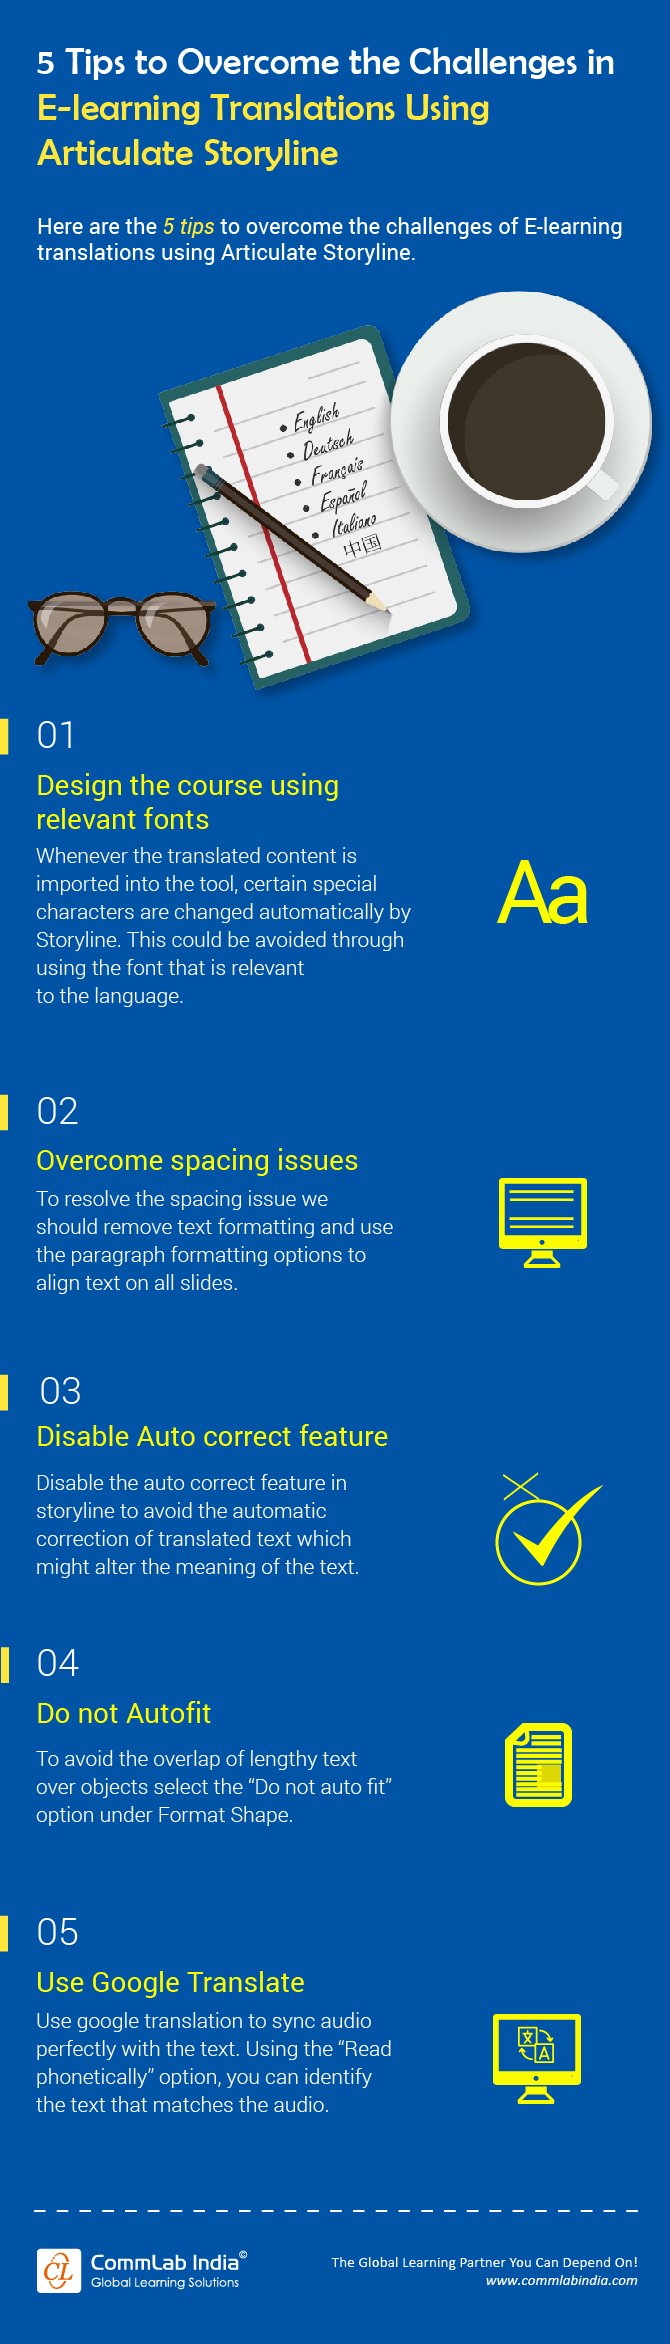 5 Tips to Overcome E-learning Translation Challenges using Articulate Storyline [Infographic]